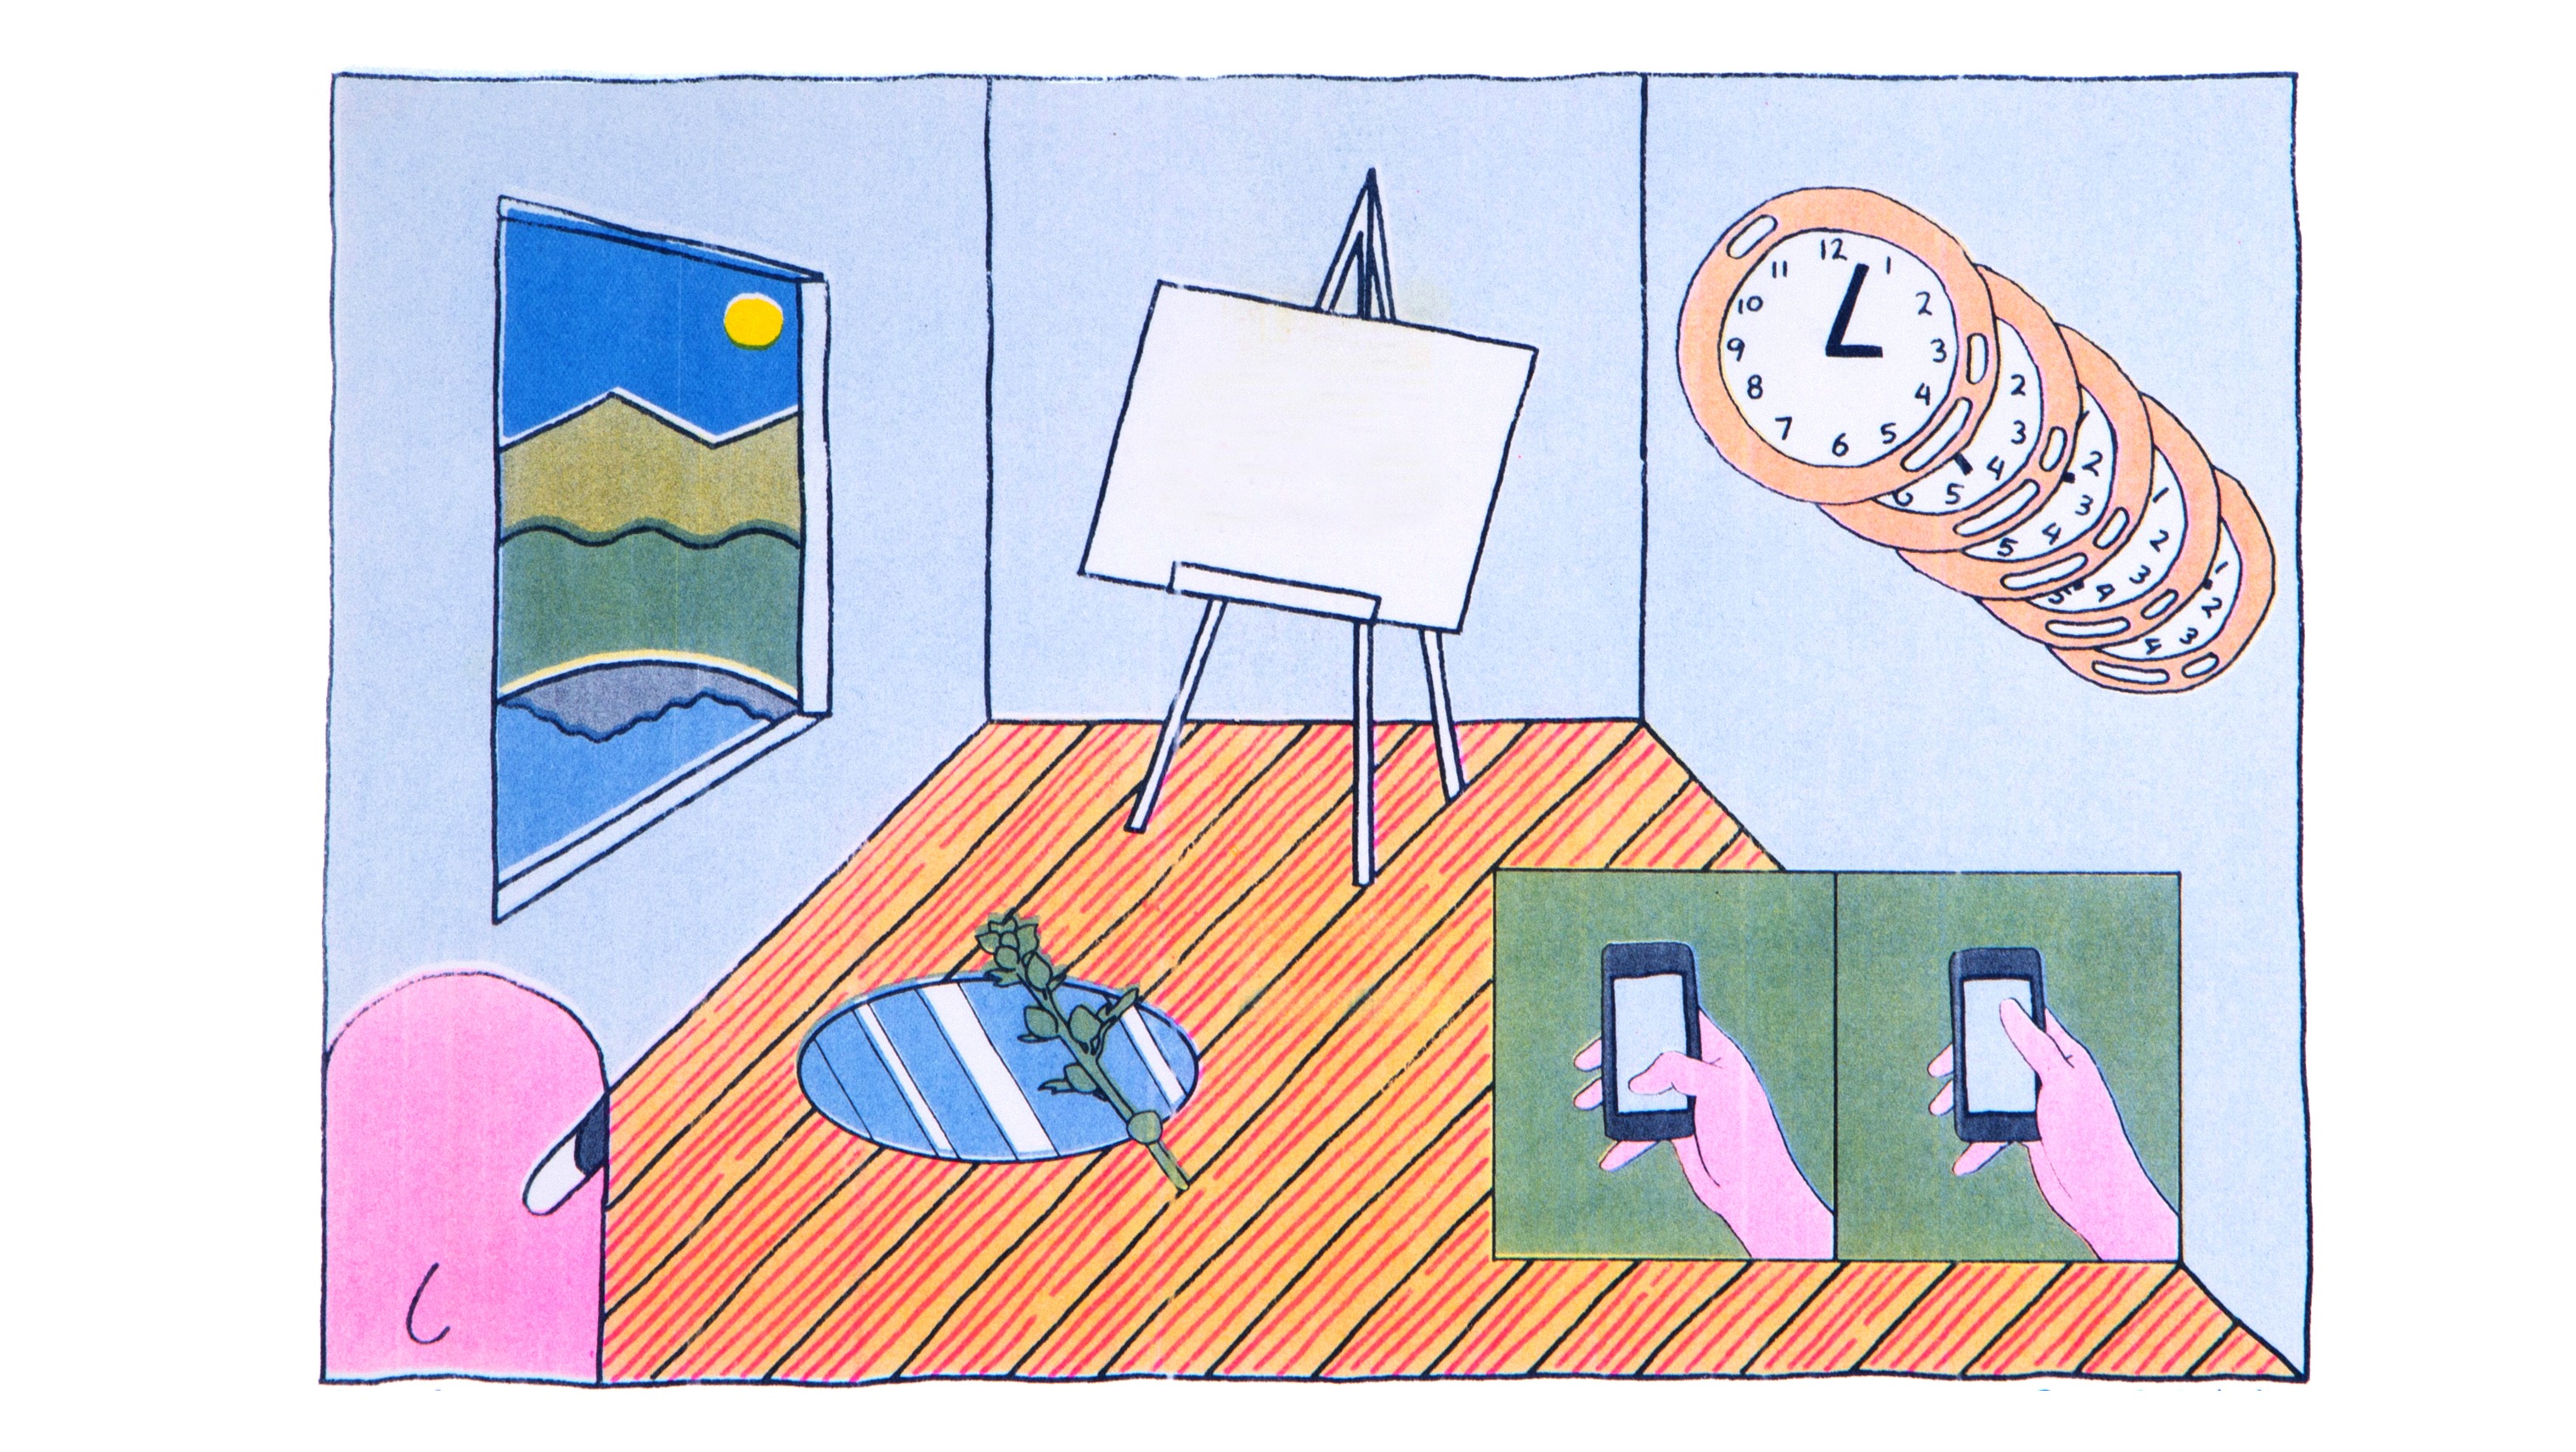 Risograph print of a drawing of an interior scene. The walls of the room are light blue, the floor is hardwood. Out the window to the left it is daylight. The face in the bottom left is content. There is a mirror on the floor with a plant over it. There is a 2-panel comic in the bottom right with a thumb scrolling on a phone. There is a series of clocks over the 2-panel comic. in the center of the room is a blank canvas. 